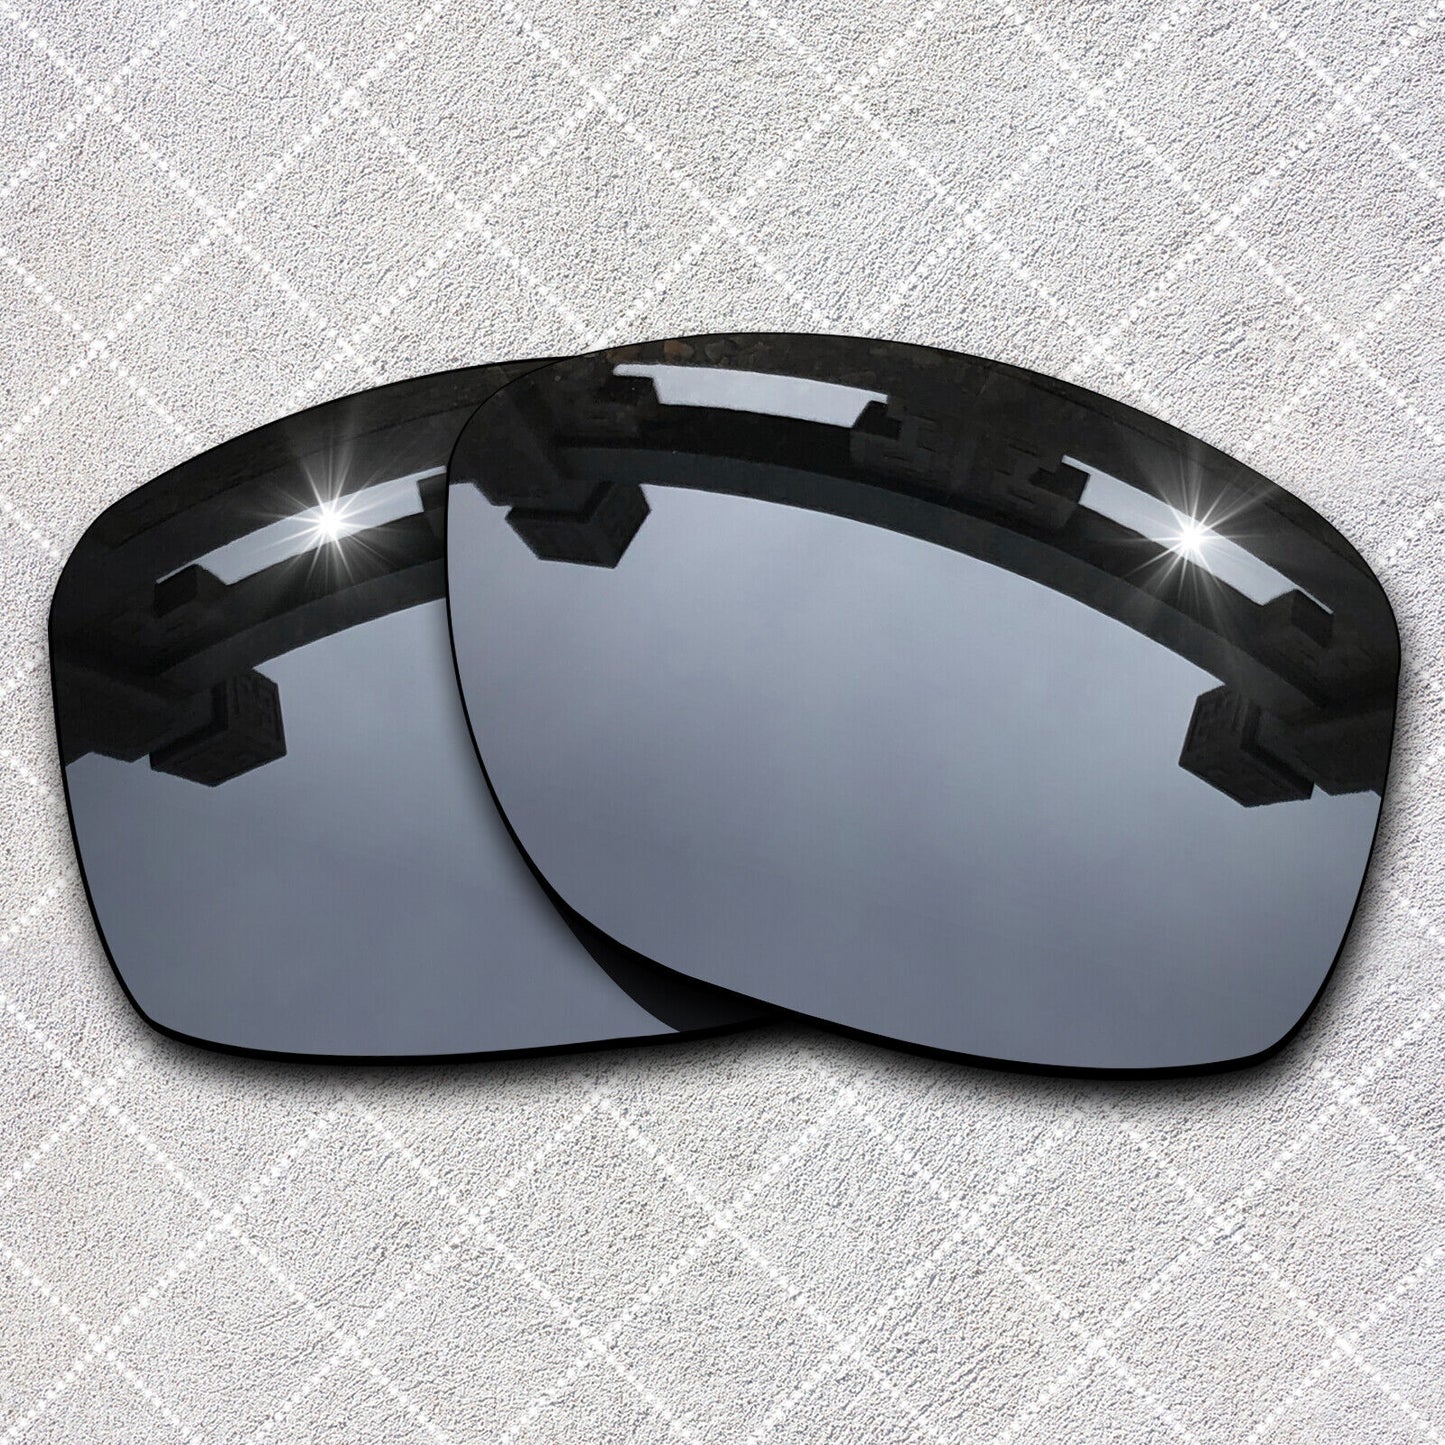 HeyRay Replacement Lenses for Pit Bull OO9127 Sunglasses Polarized - Opt